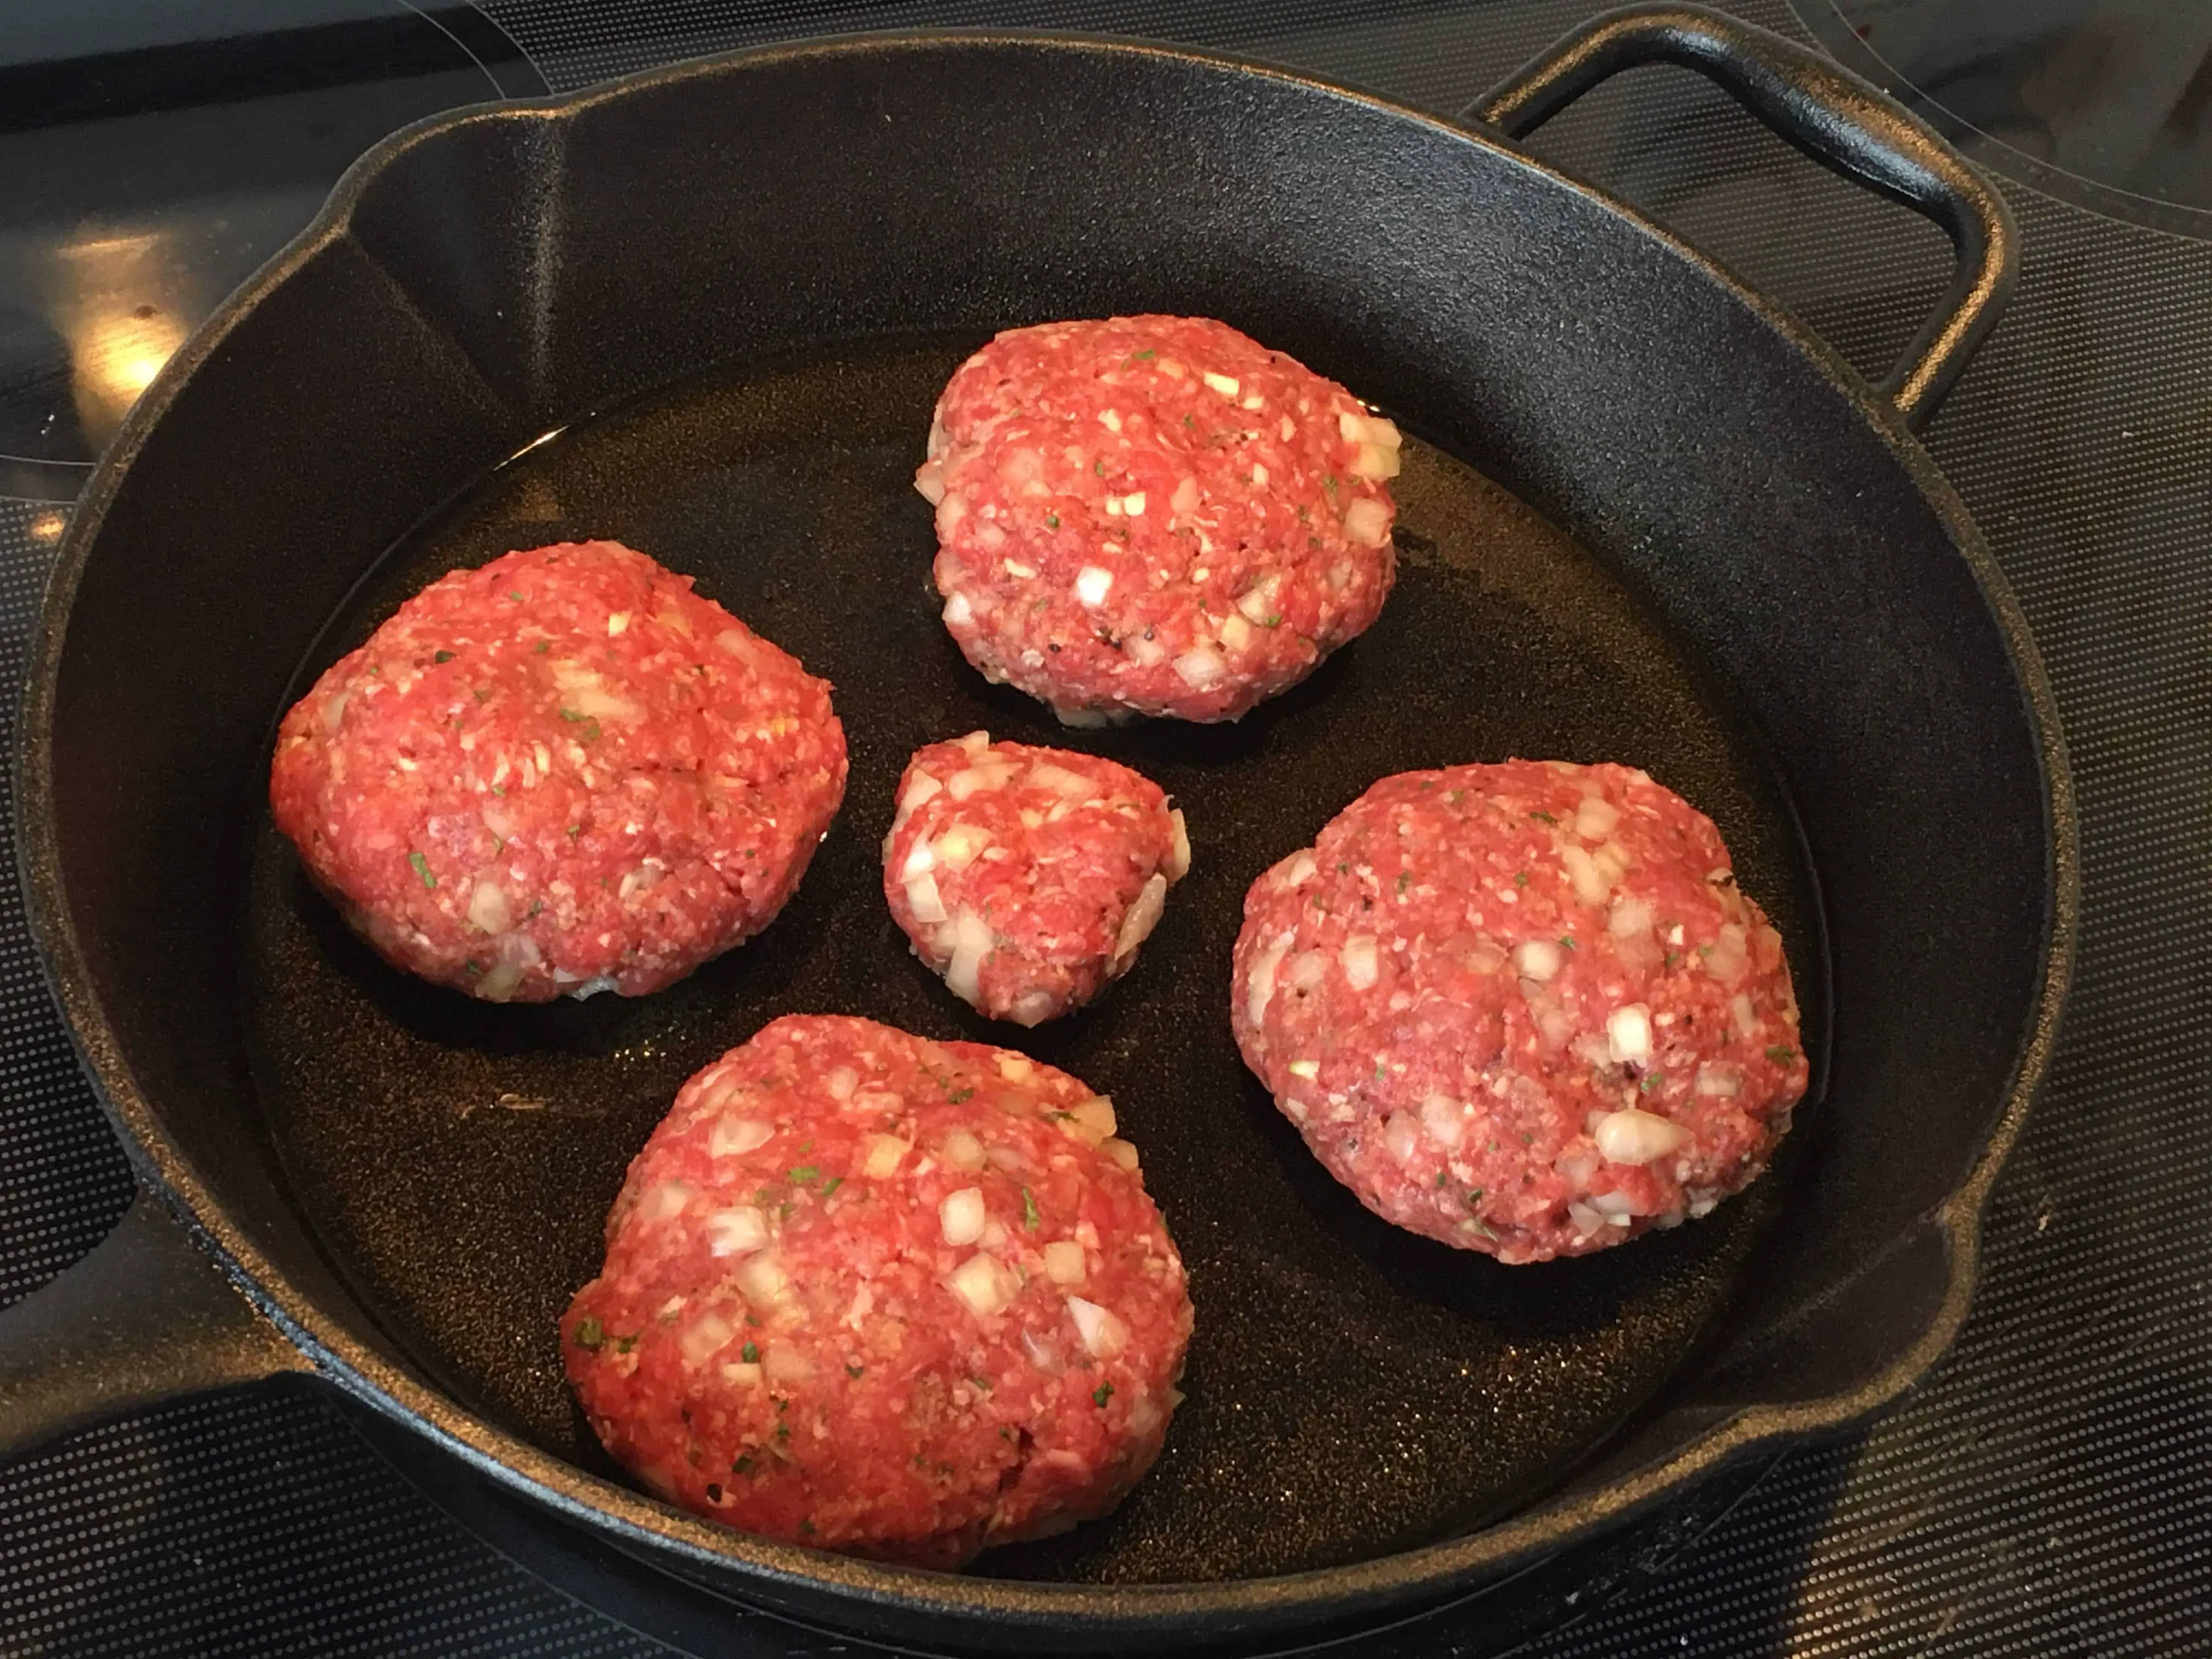 Yes, You Can Grill Burgers on a Cast-Iron Skillet. Here's How - CNET